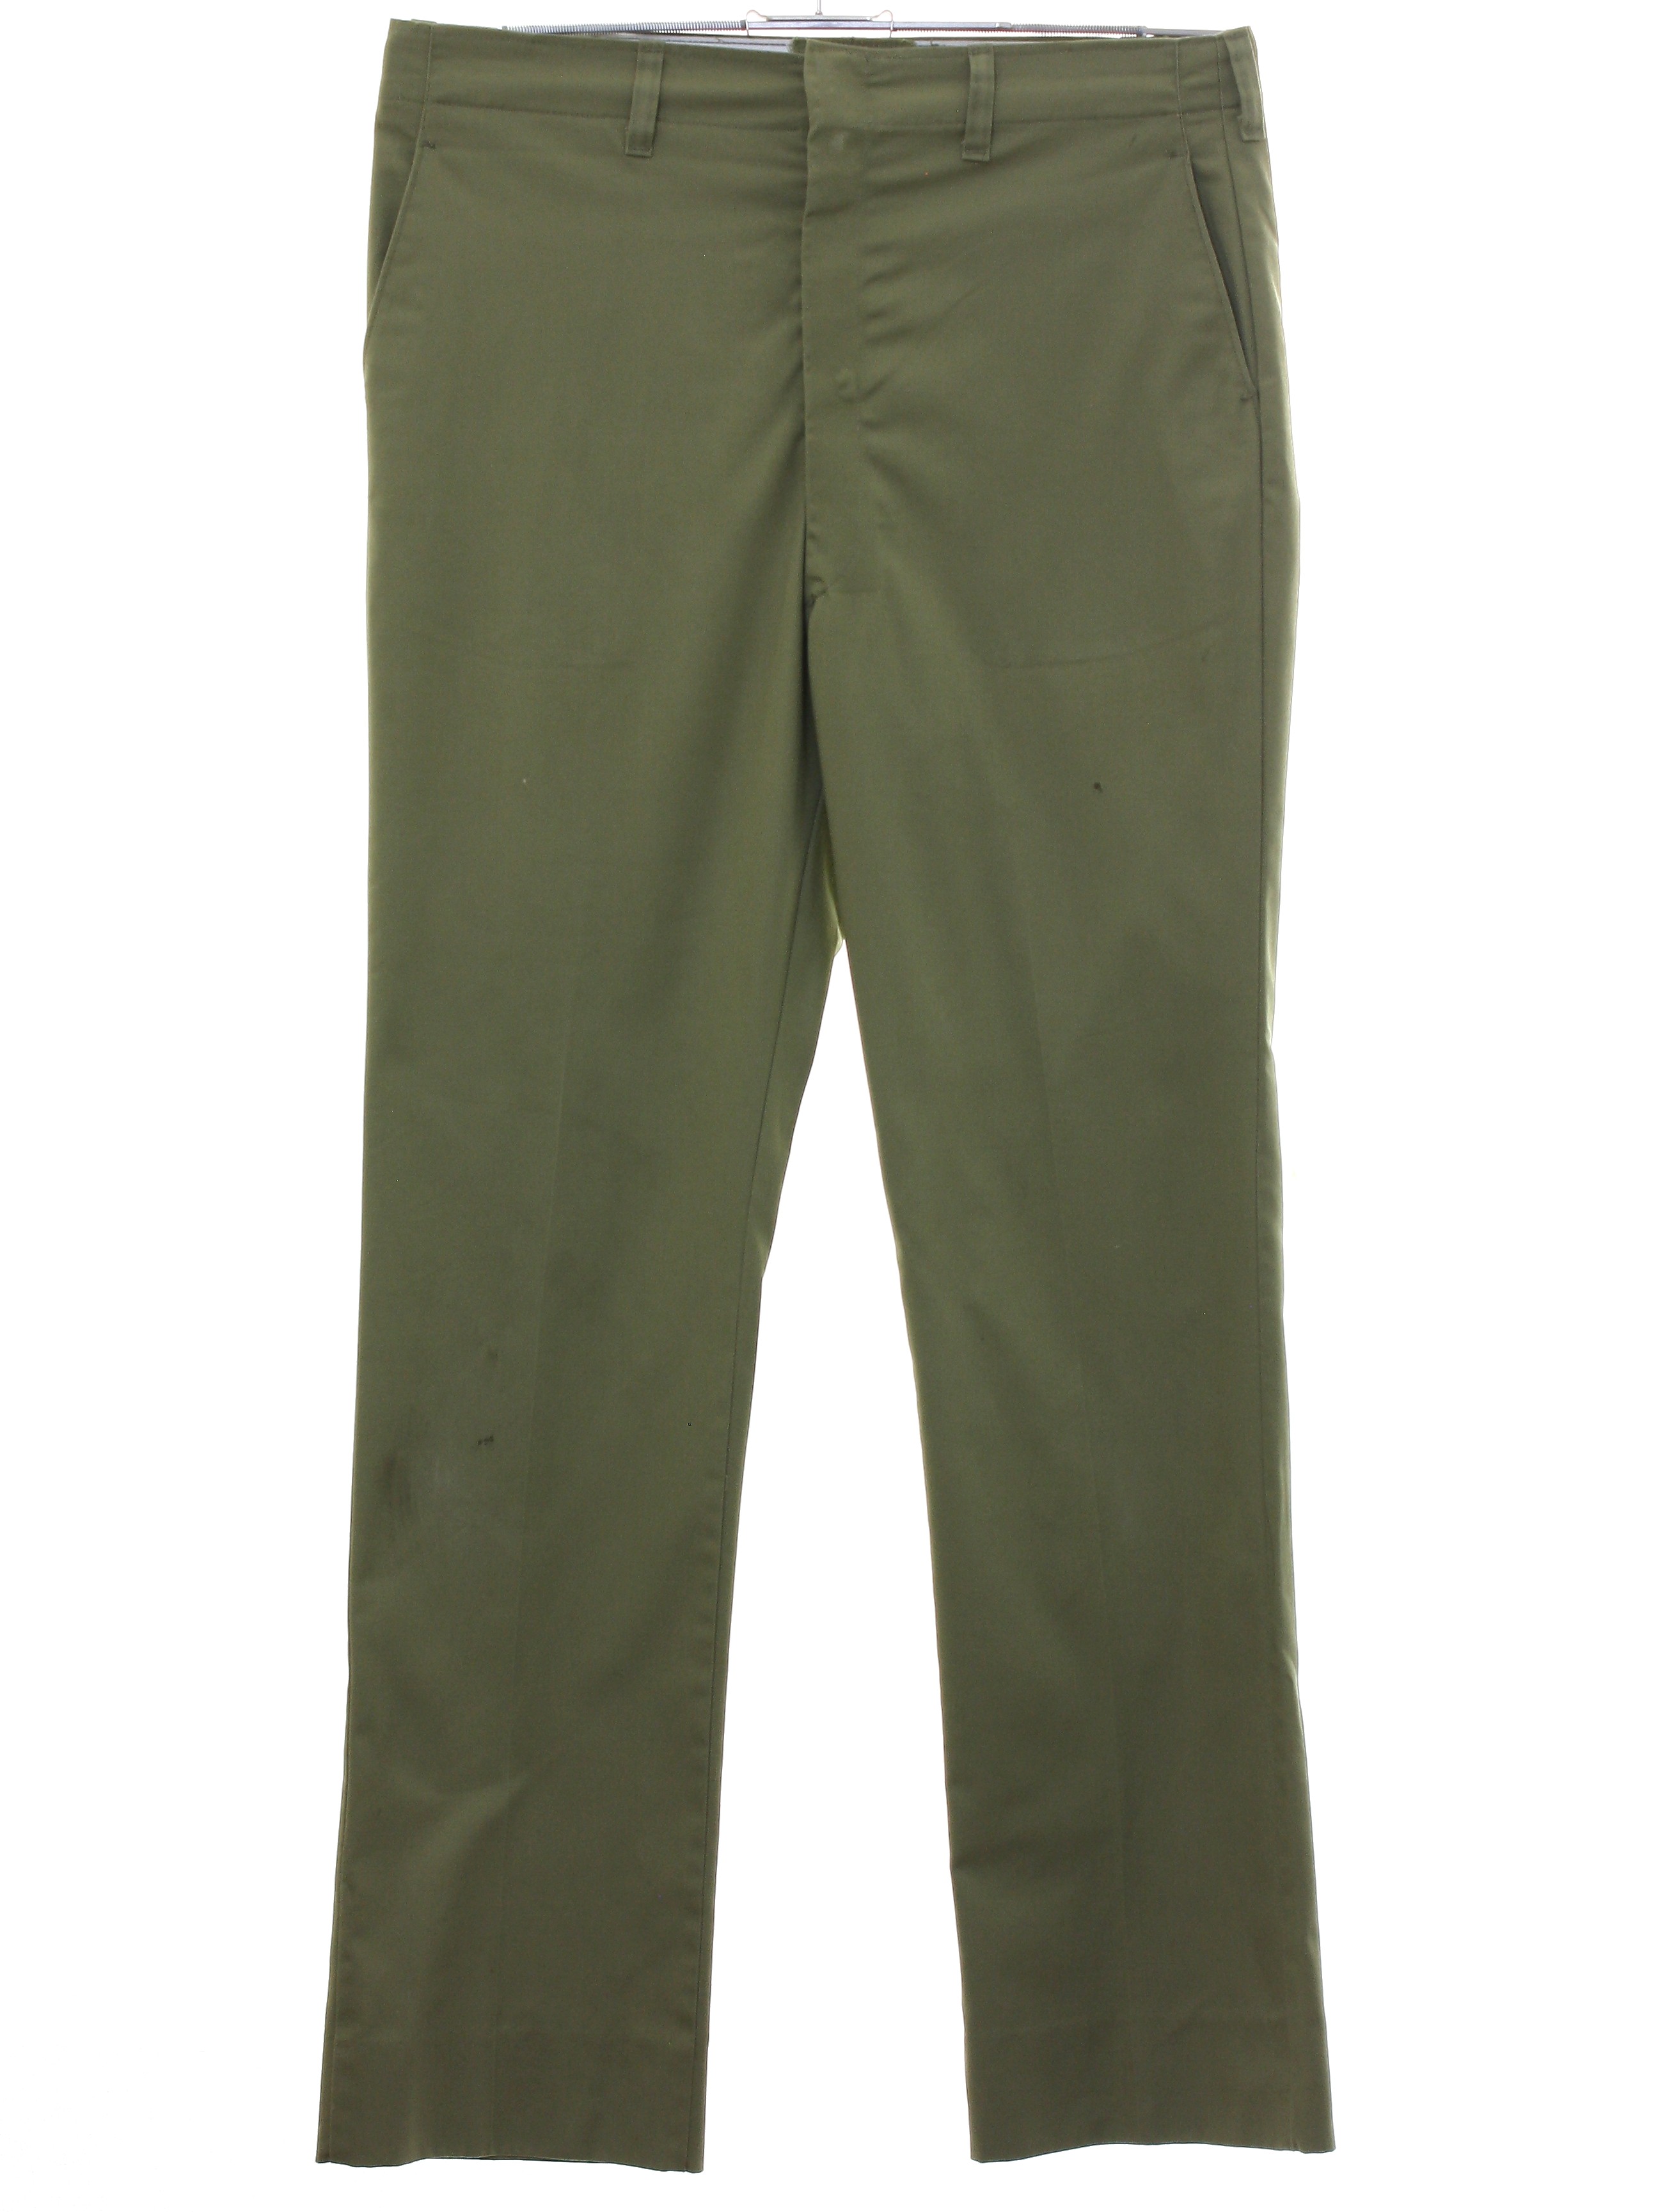 Vintage Boy Scouts of America Sixties Pants: Late 60s -Boy Scouts of ...